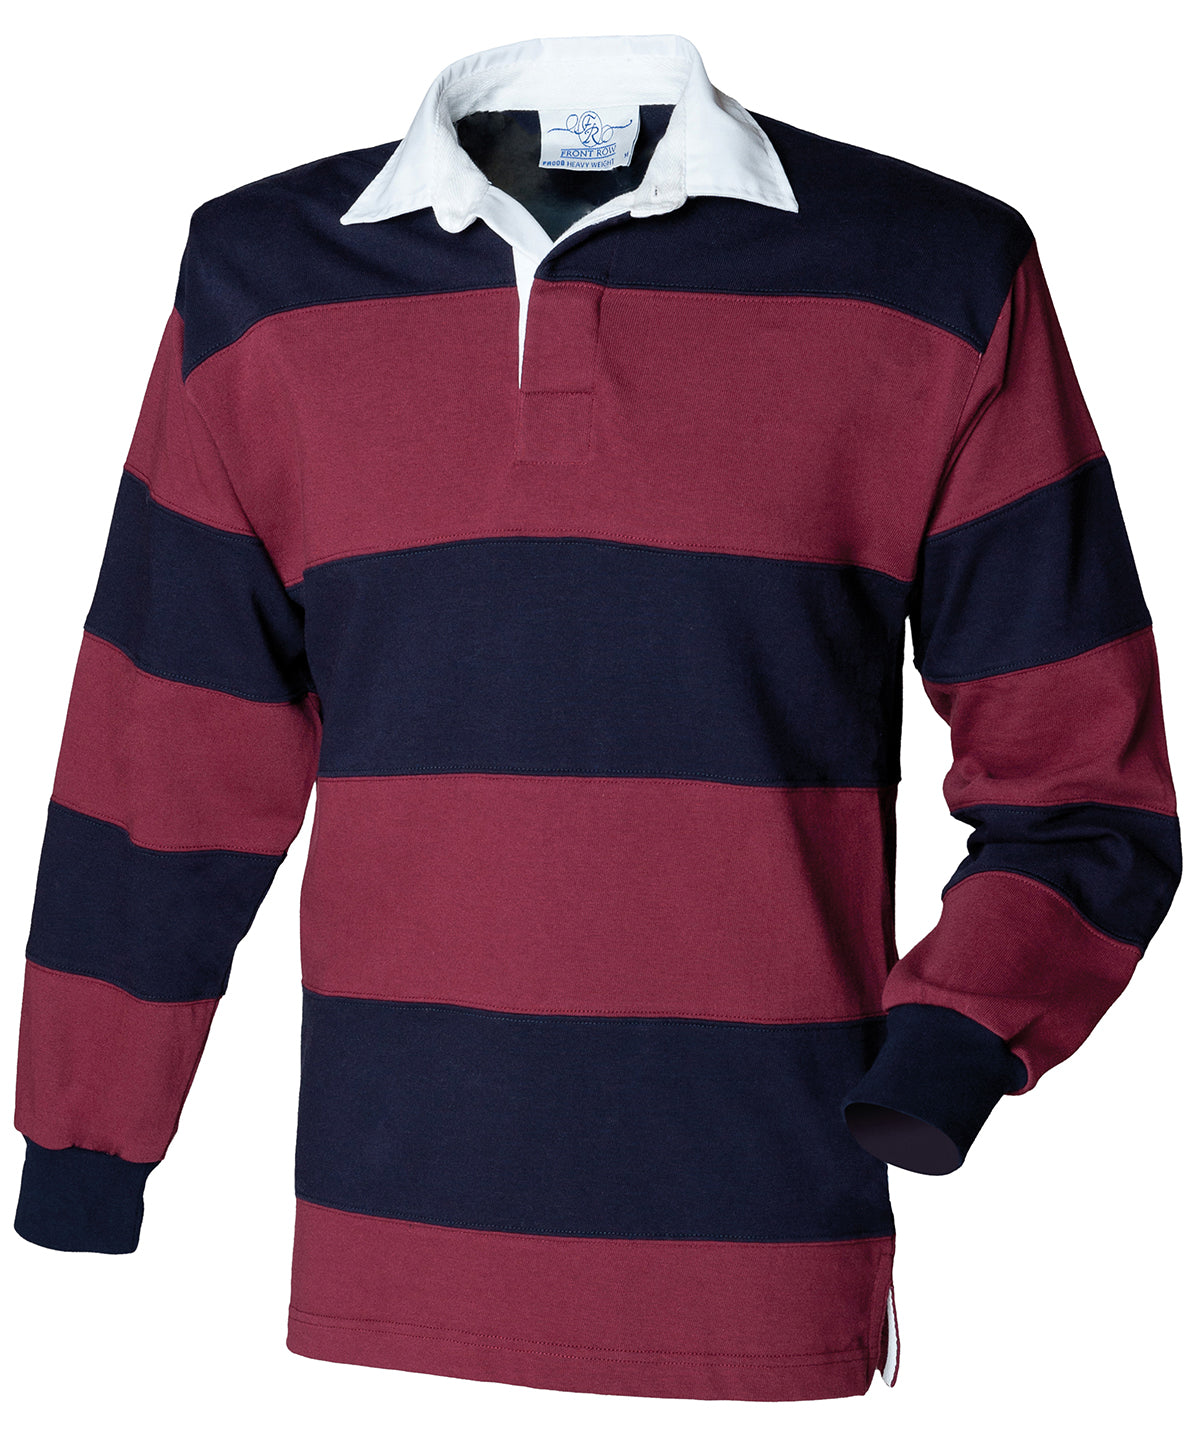 Front Row Sewn stripe long sleeve rugby shirt